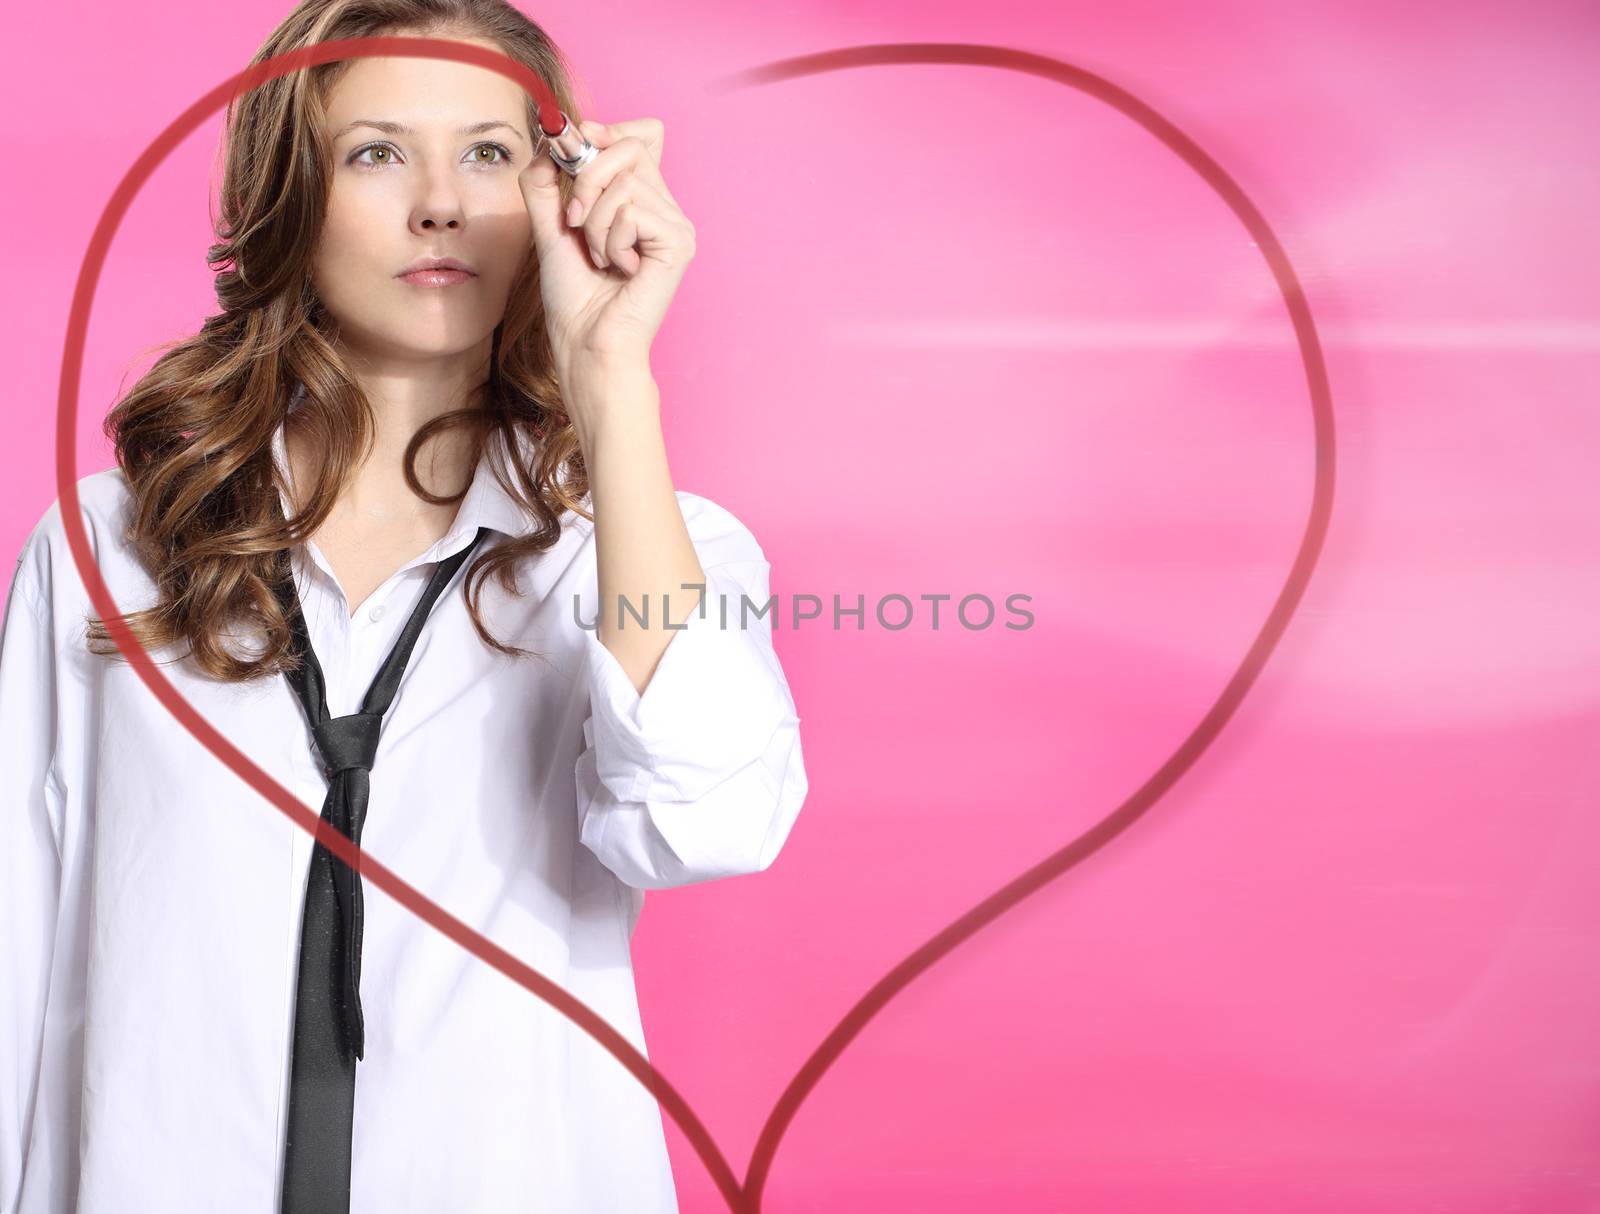 Woman painting lipstick heart on glass standing on a pink background